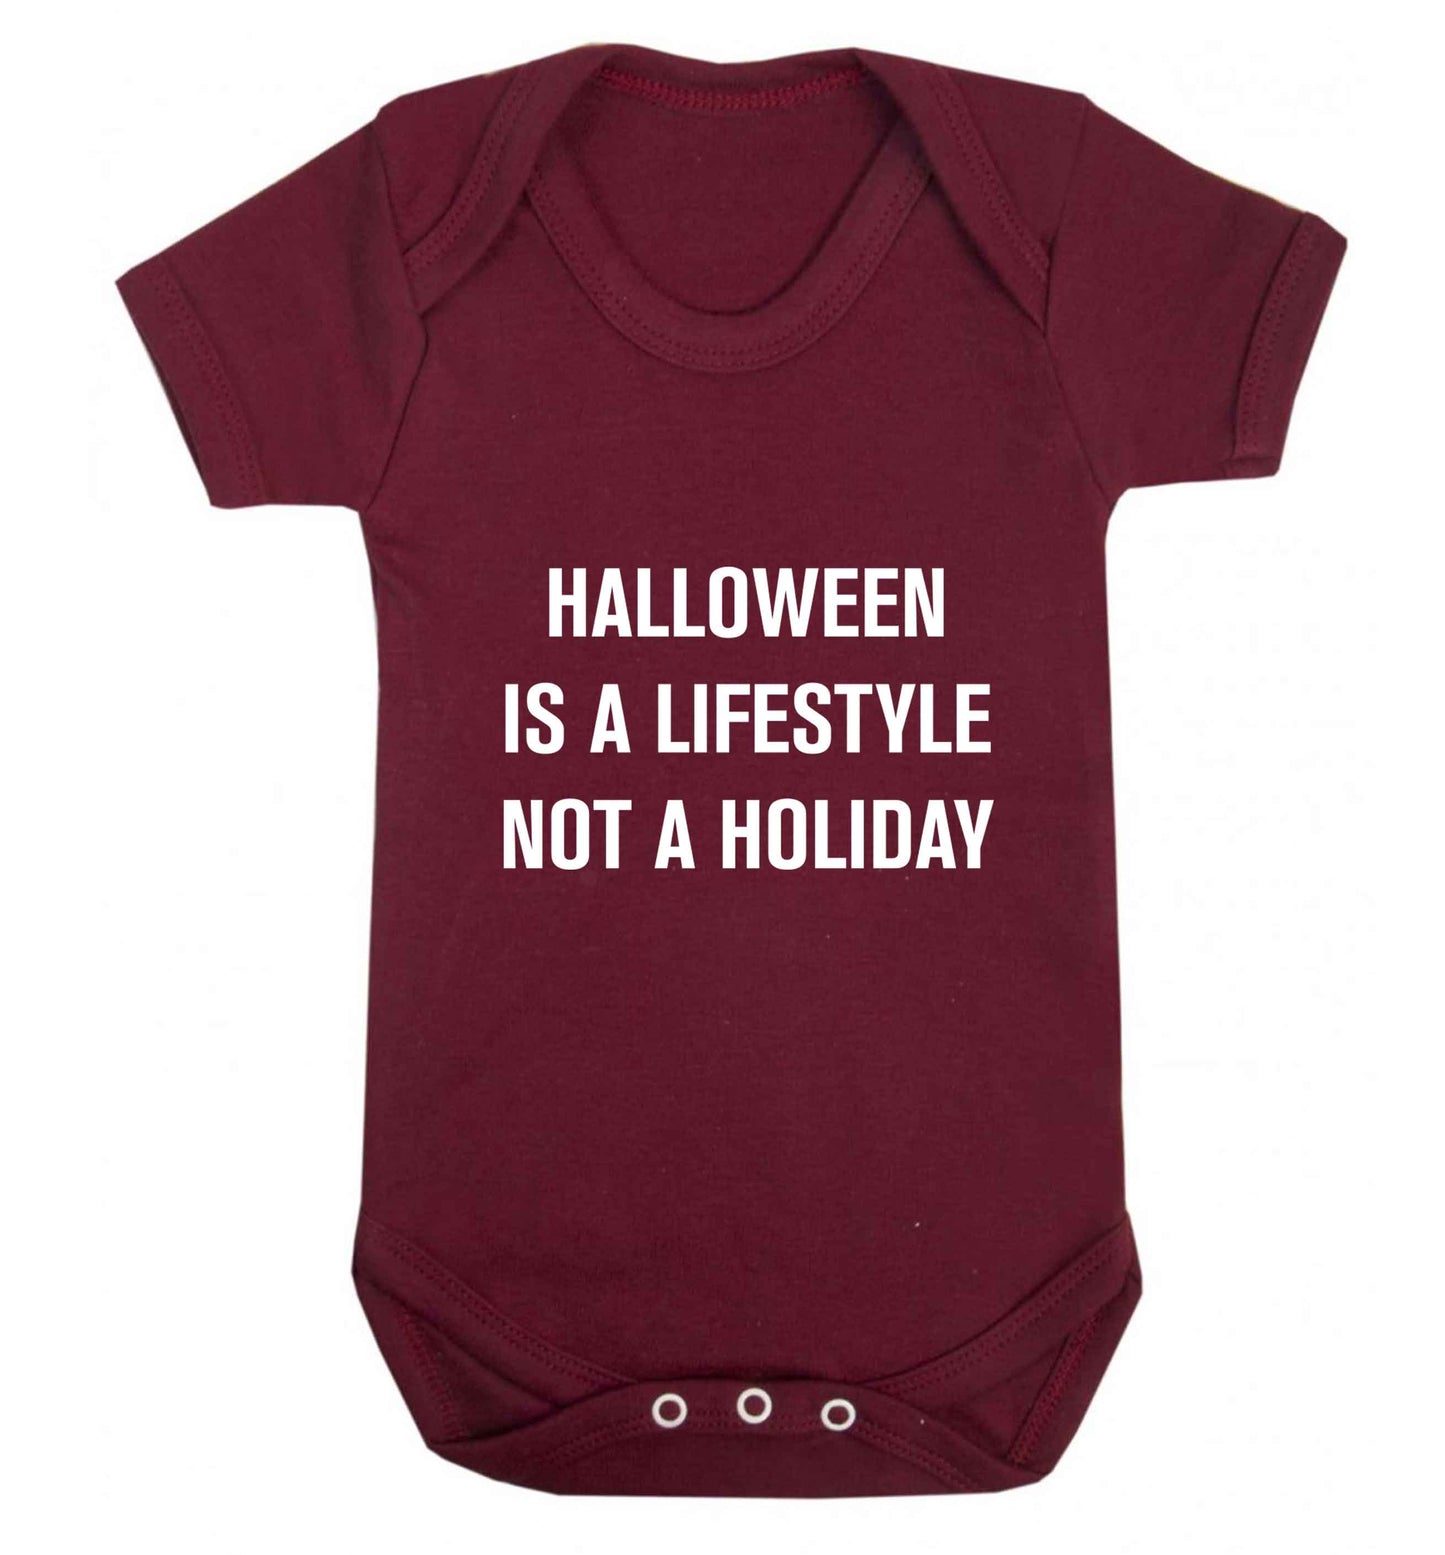 Halloween is a lifestyle not a holiday baby vest maroon 18-24 months